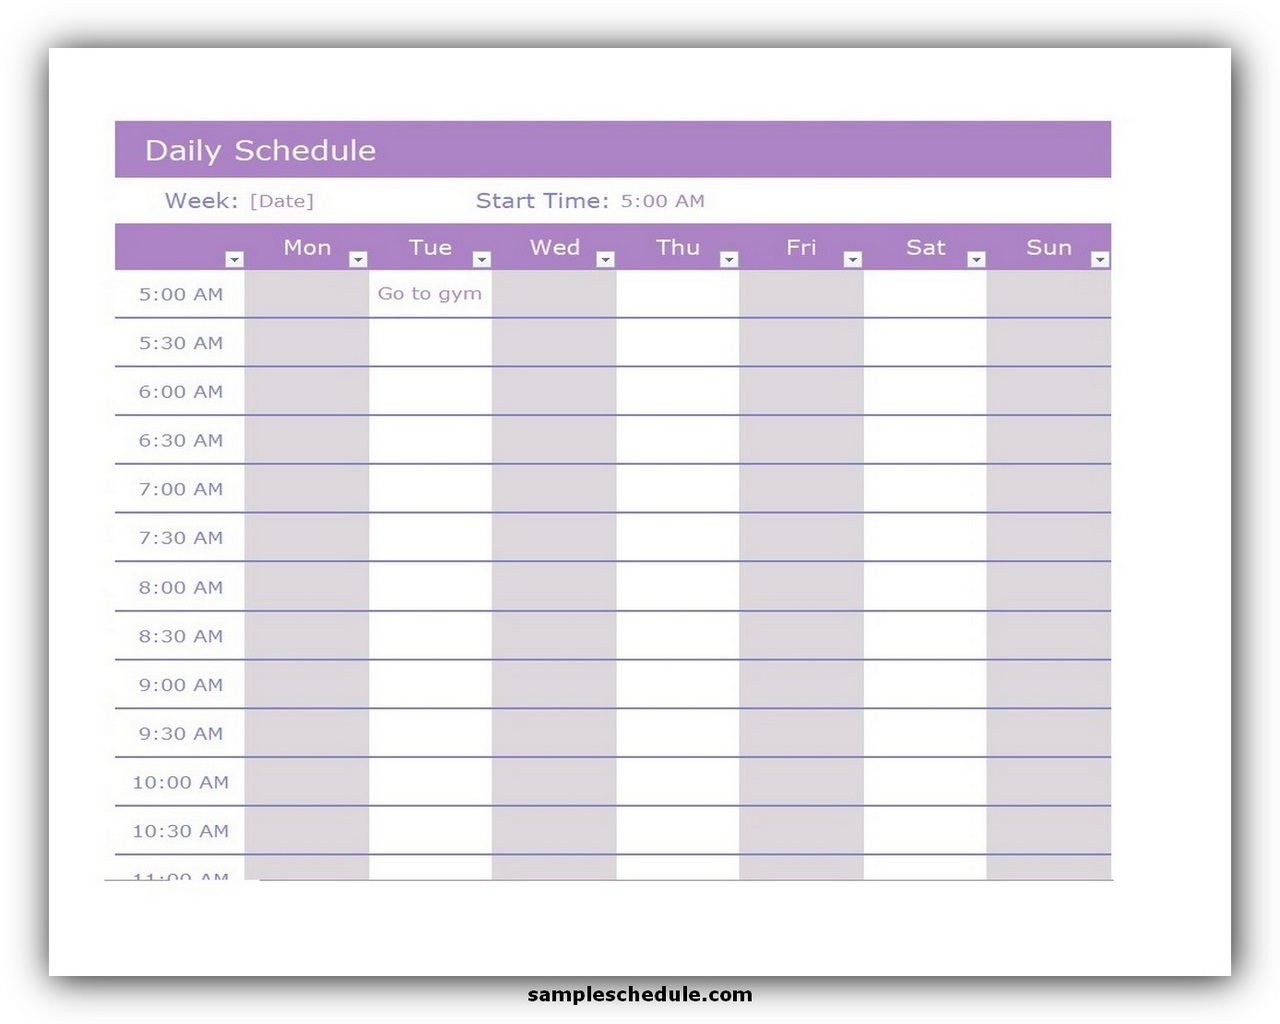 11 Daily Schedule Template Excel Free Sample Schedule